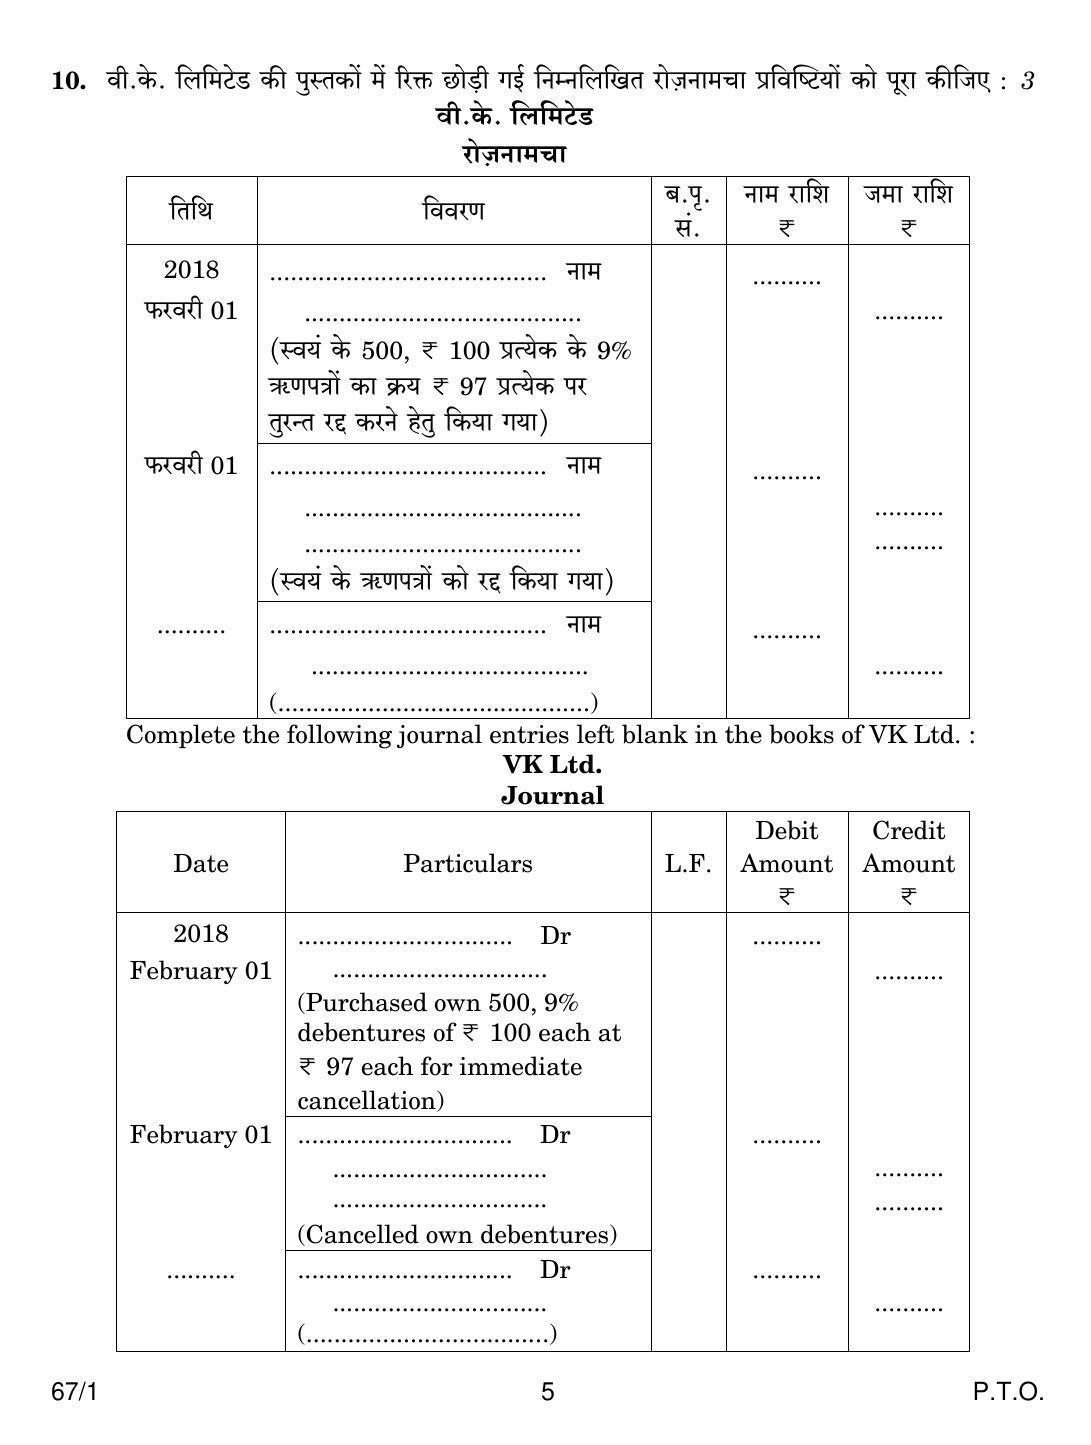 CBSE Class 12 67-1 ACCOUNTANCY 2018 Question Paper - Page 5